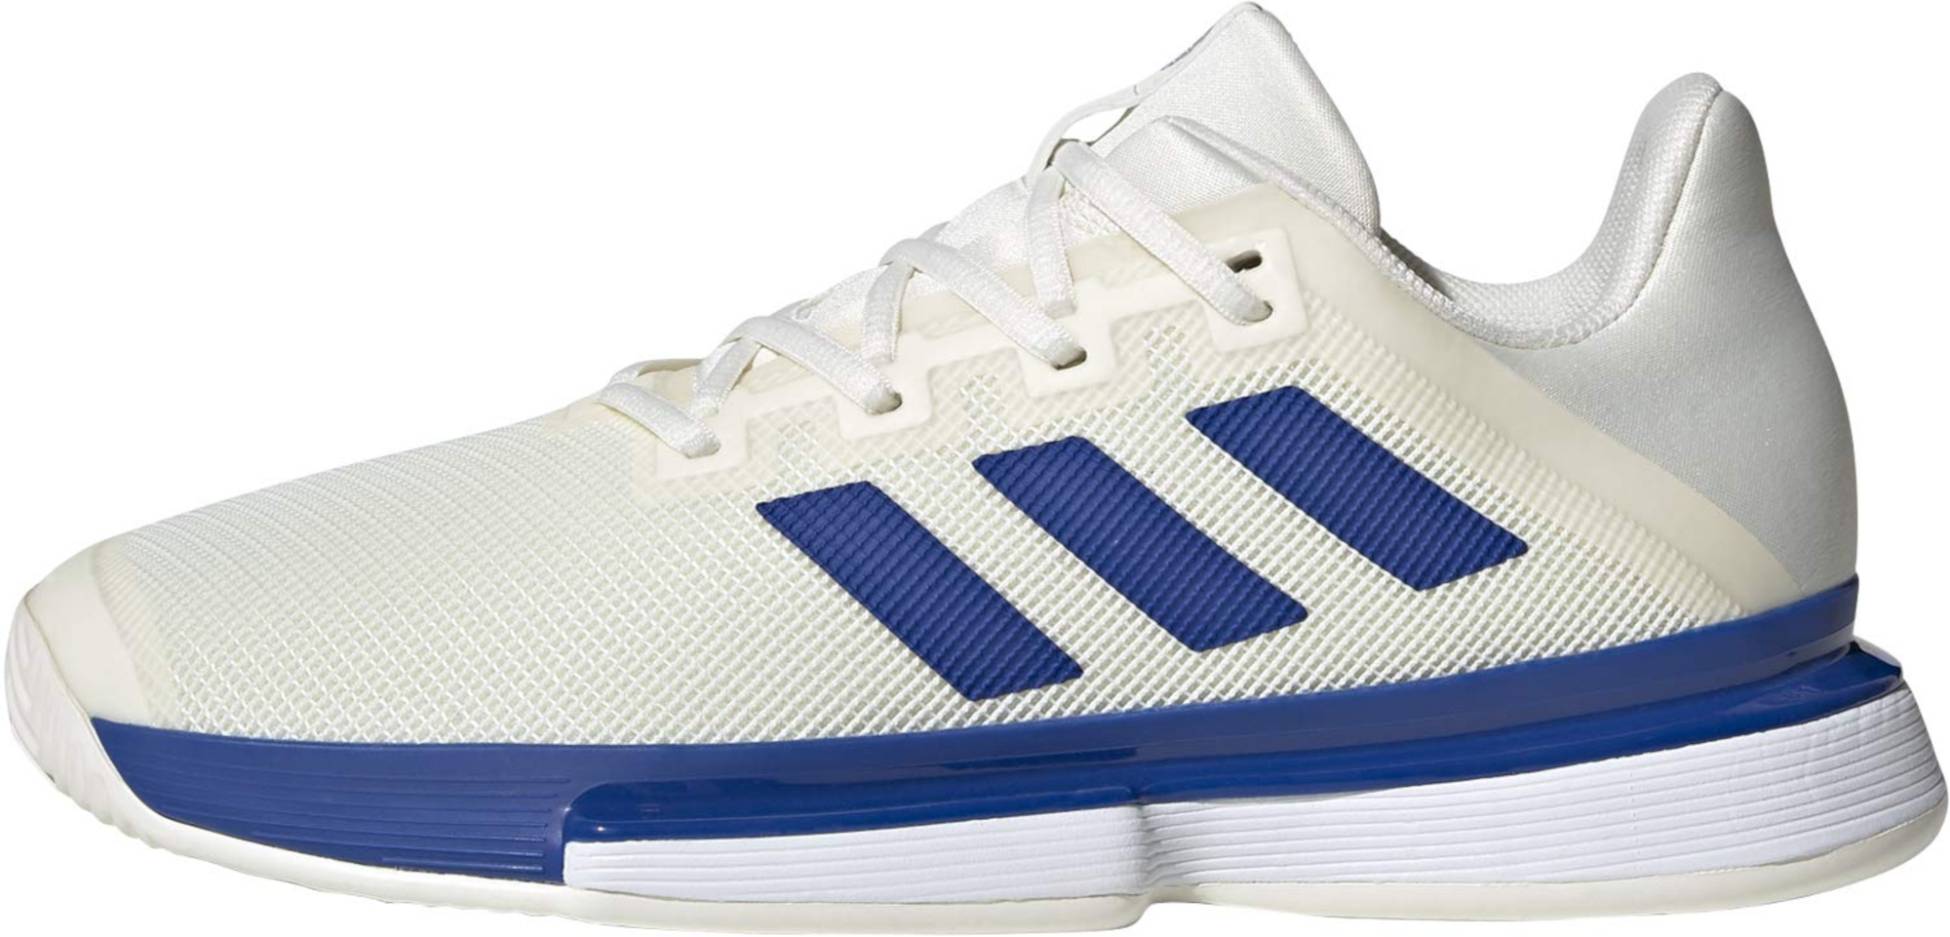 adidas solematch bounce m